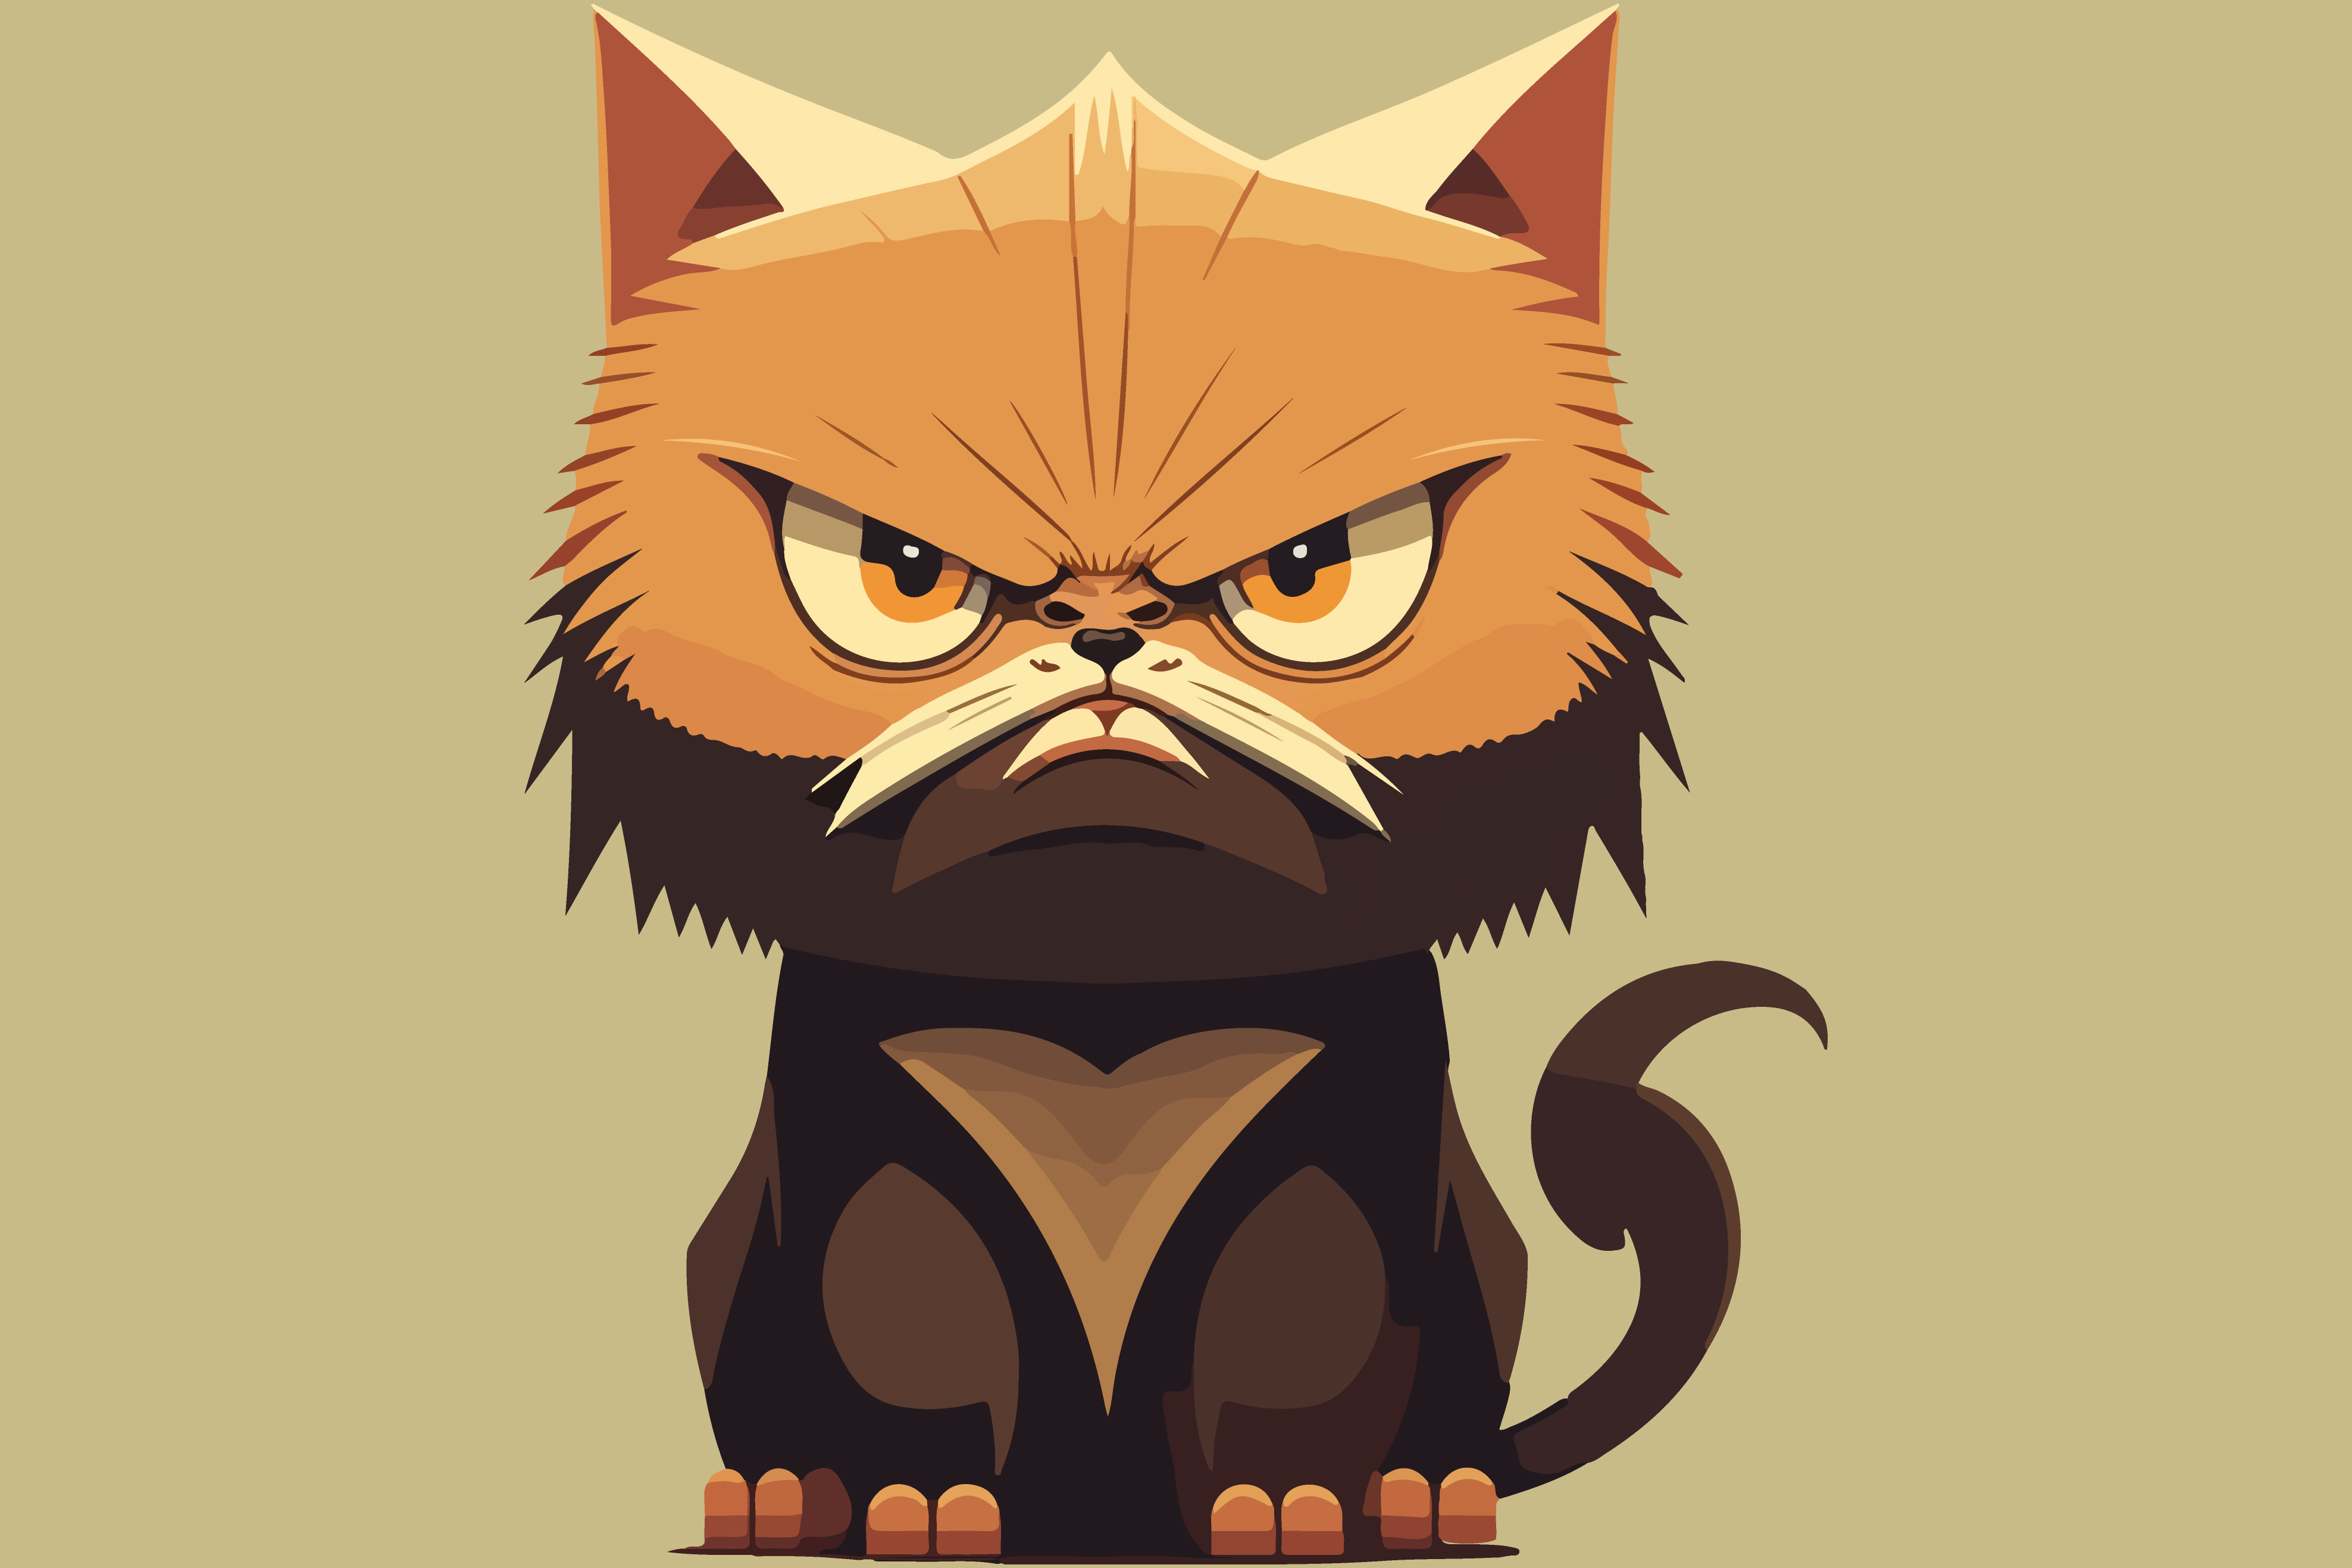 69,135 Cat Angry Face Images, Stock Photos, 3D objects, & Vectors